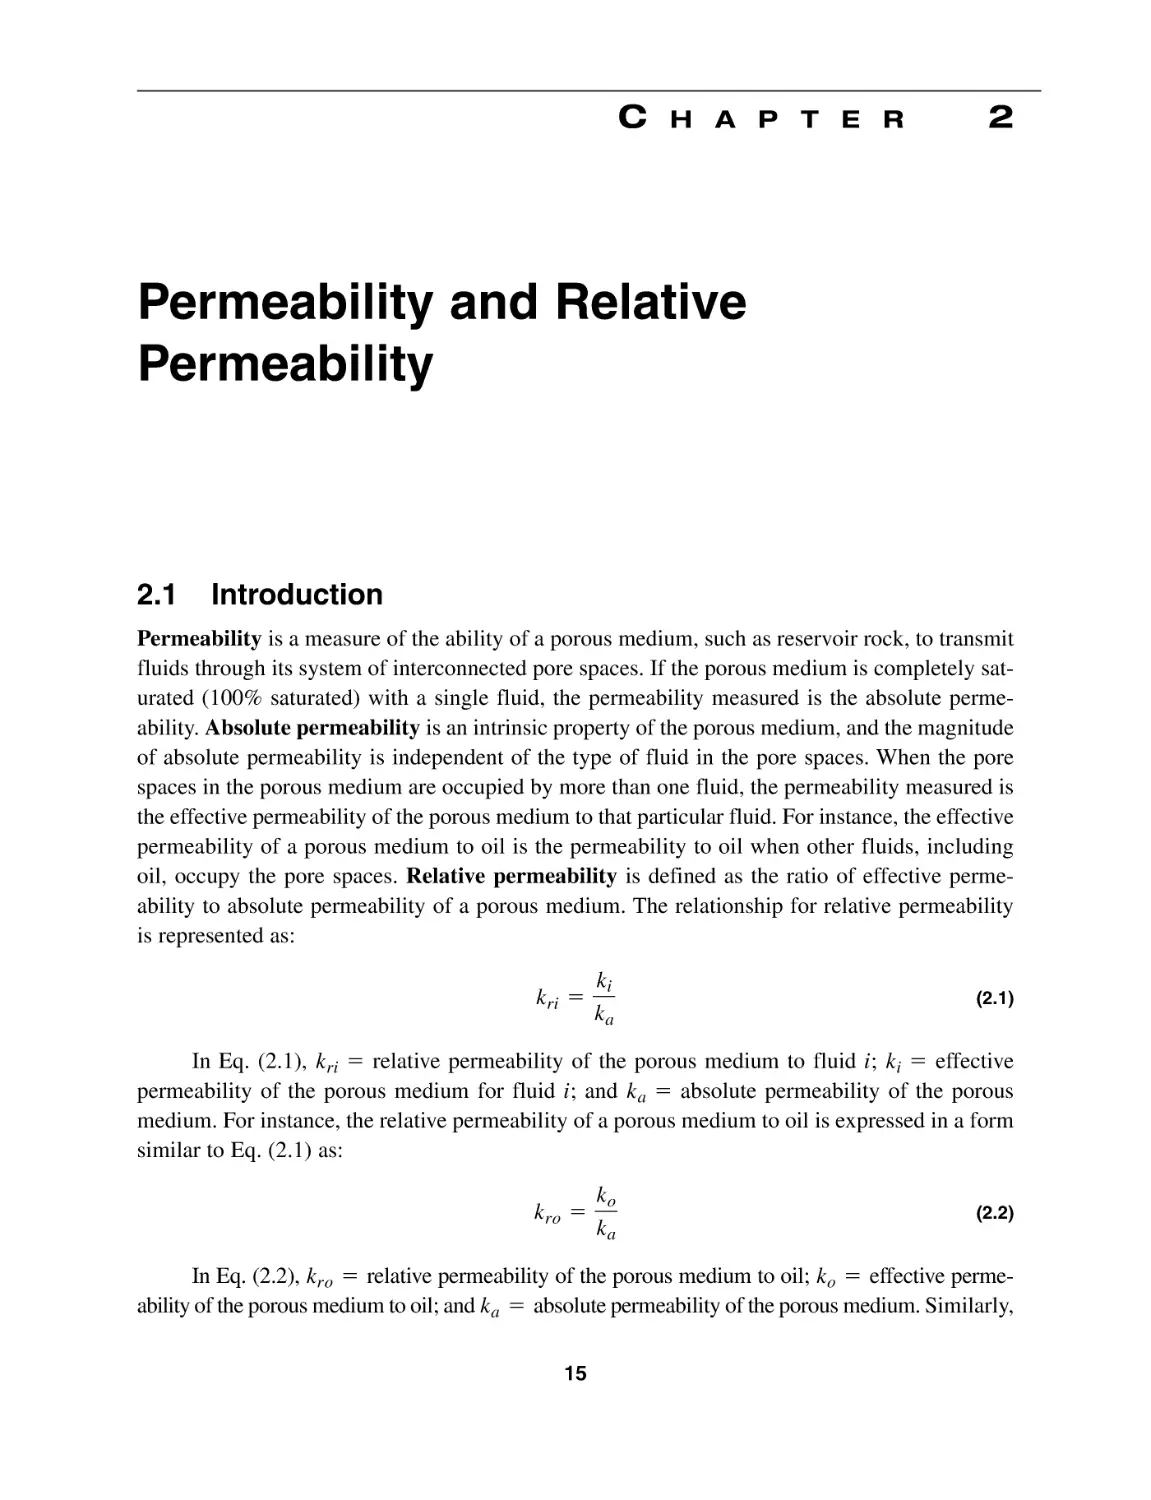 Chapter 2 Permeability and Relative Permeability
2.1 Introduction